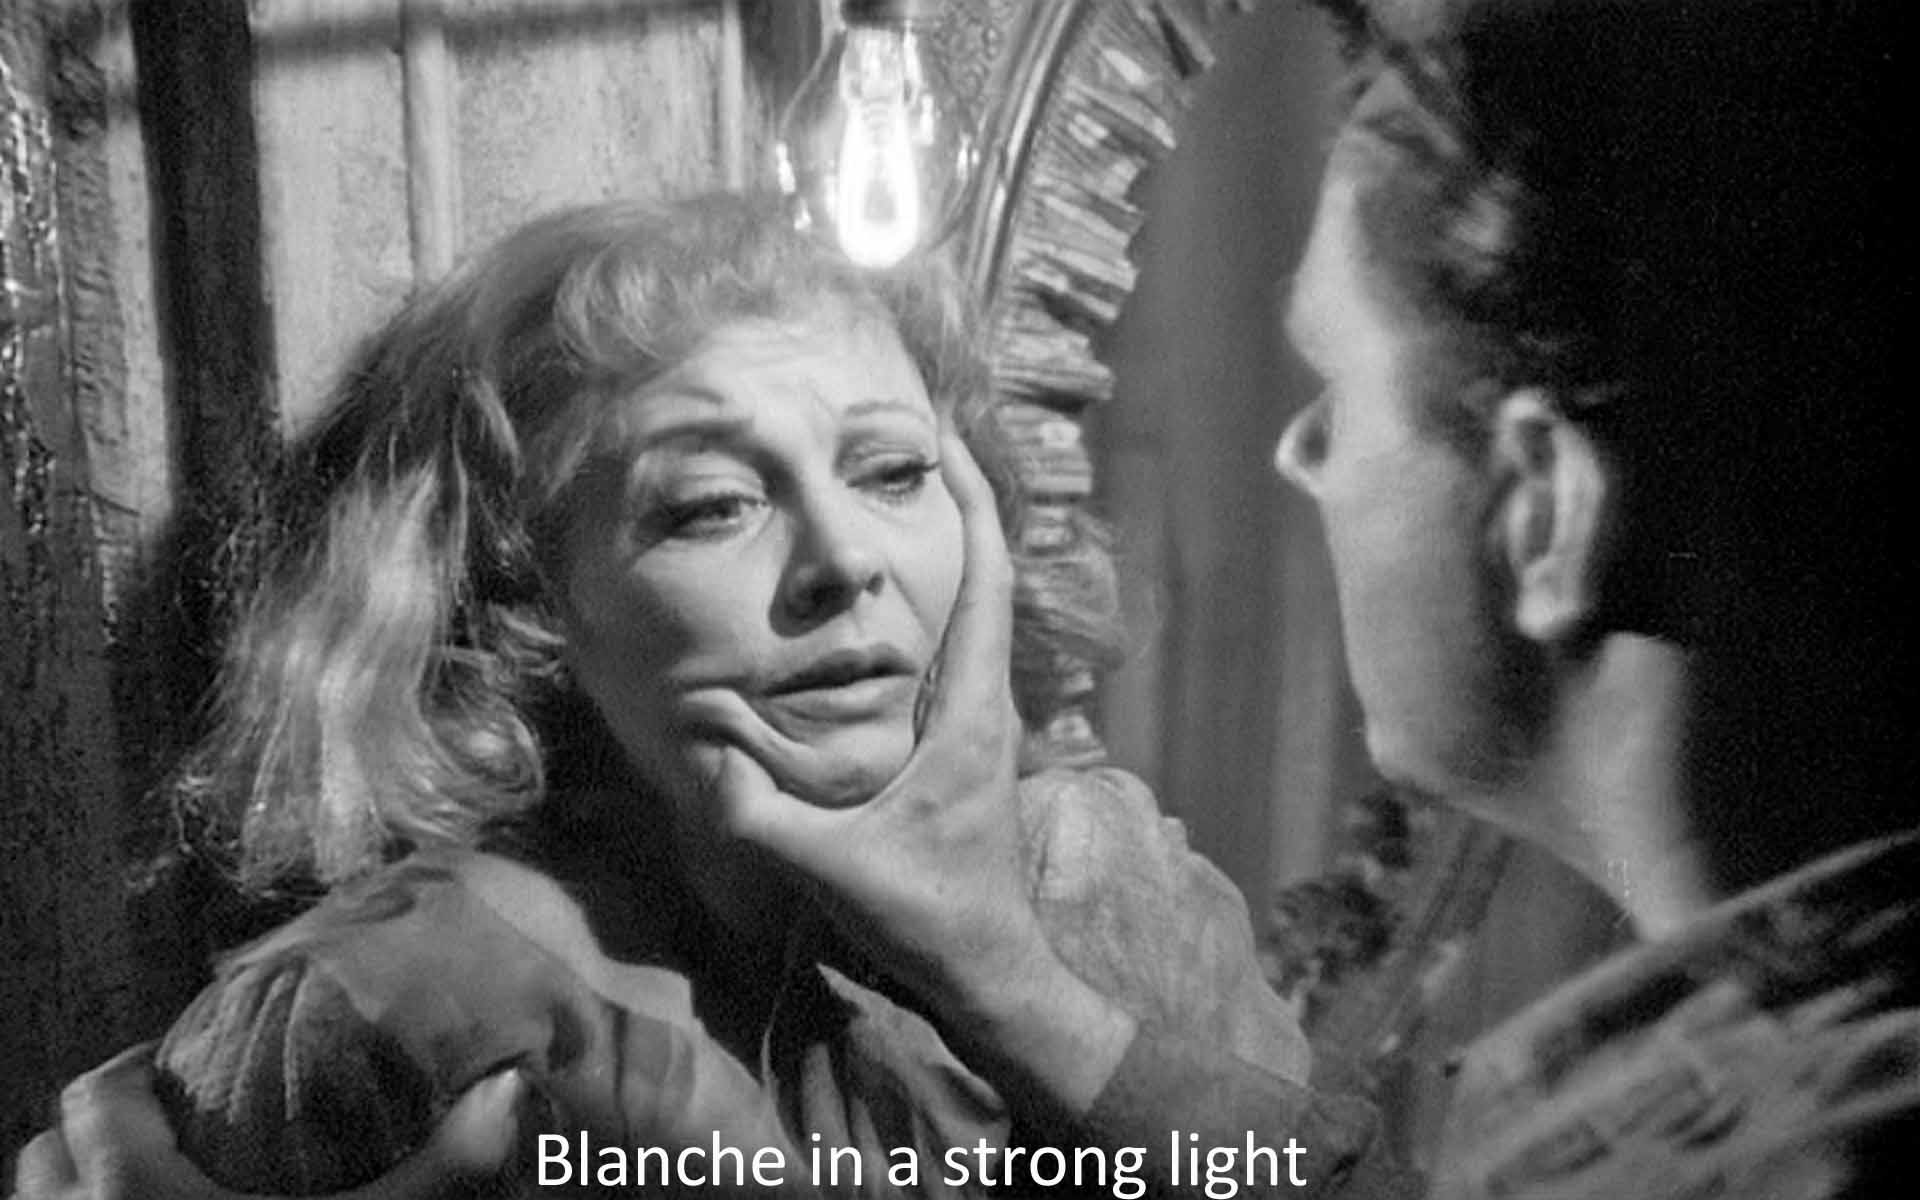 Blanche in a strong light